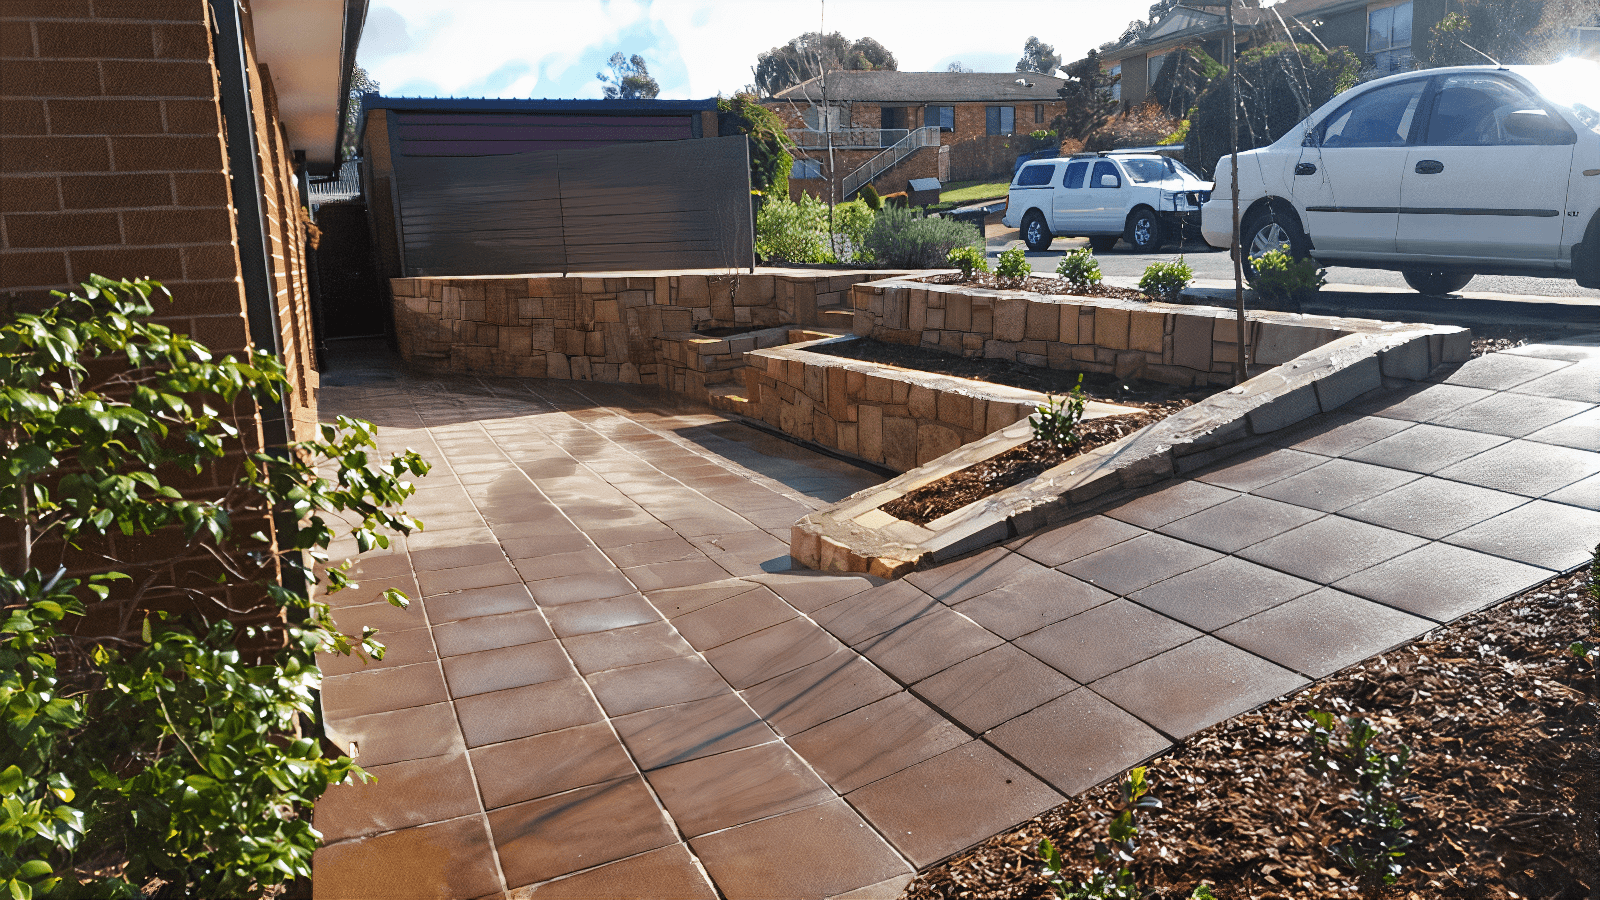 Retaining wall and paving by Dan and Dan Landscaping